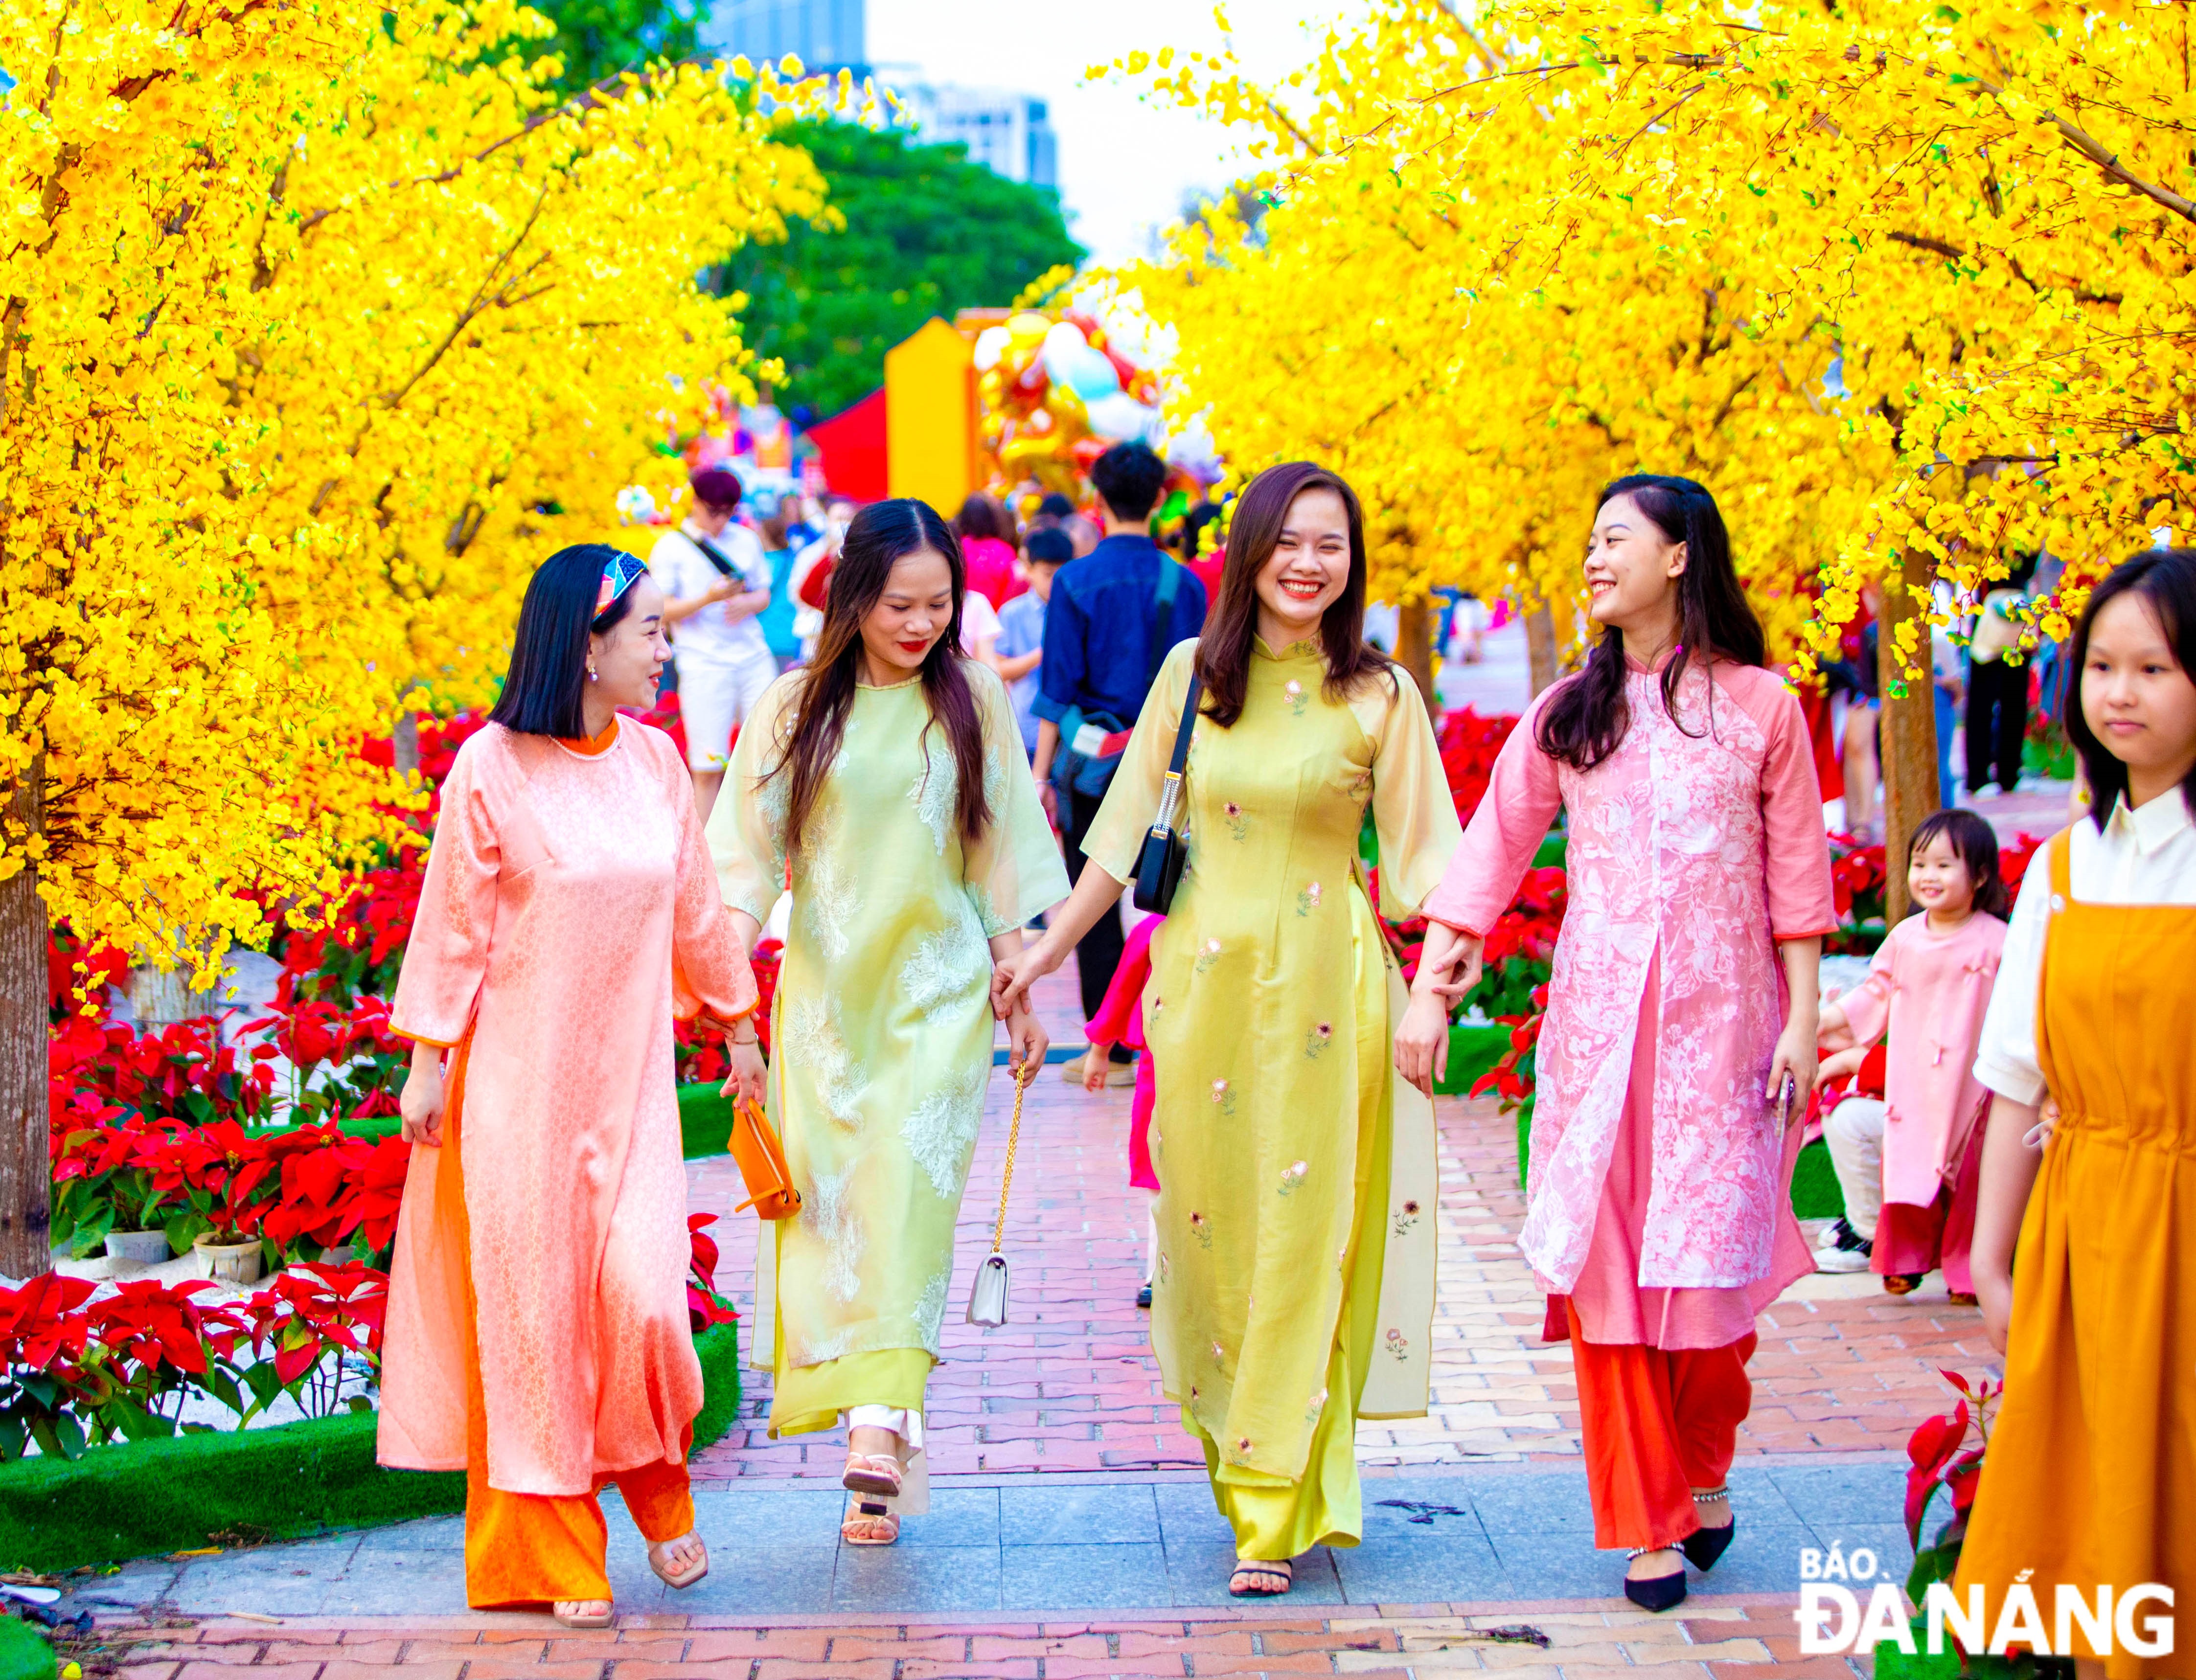 Girls dressed up in graceful 'ao dai' going for a stroll along the Bach Dang flower street.